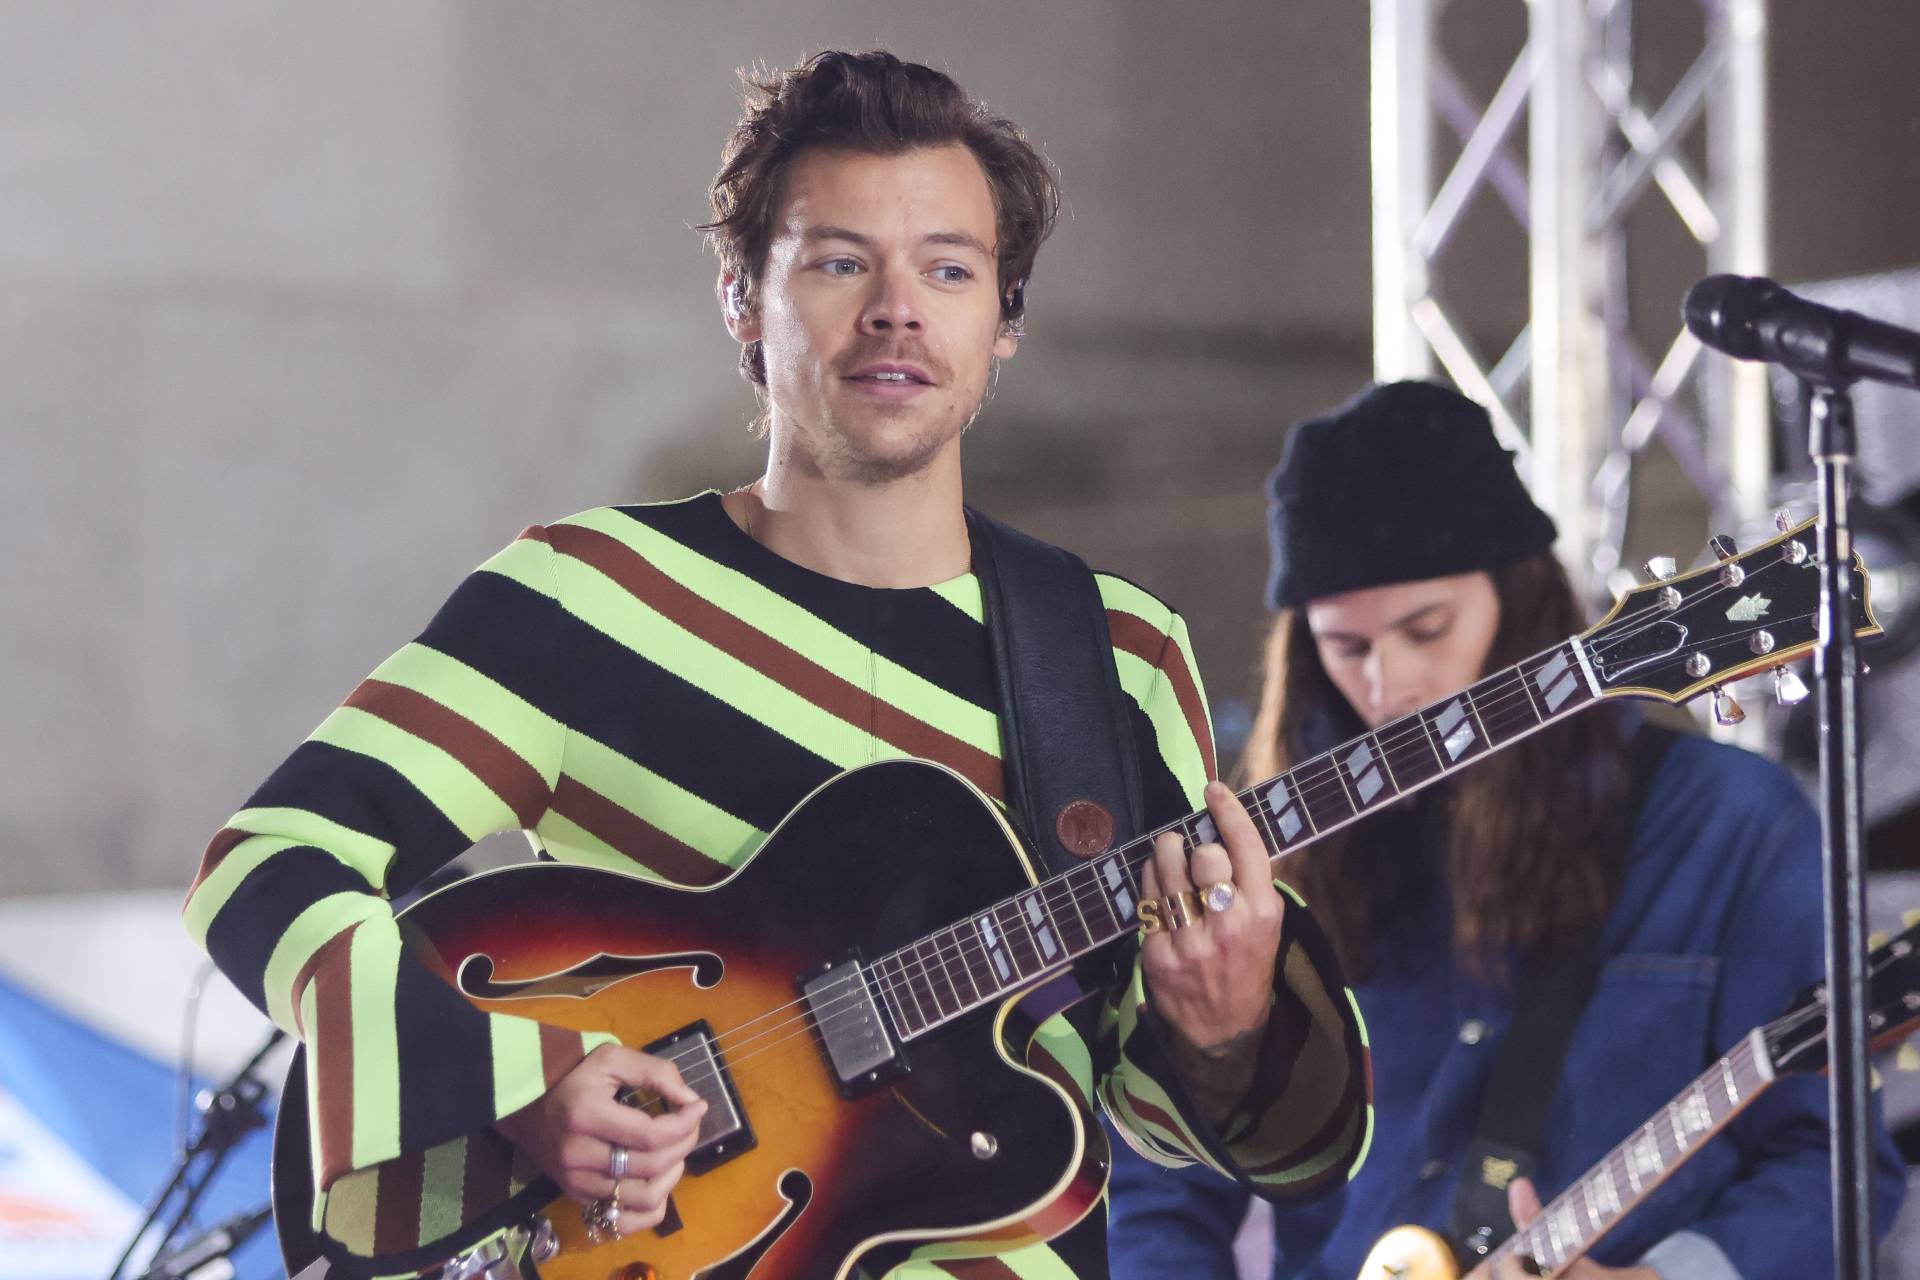 Harry Styles' New Album Will Be Released in Late May